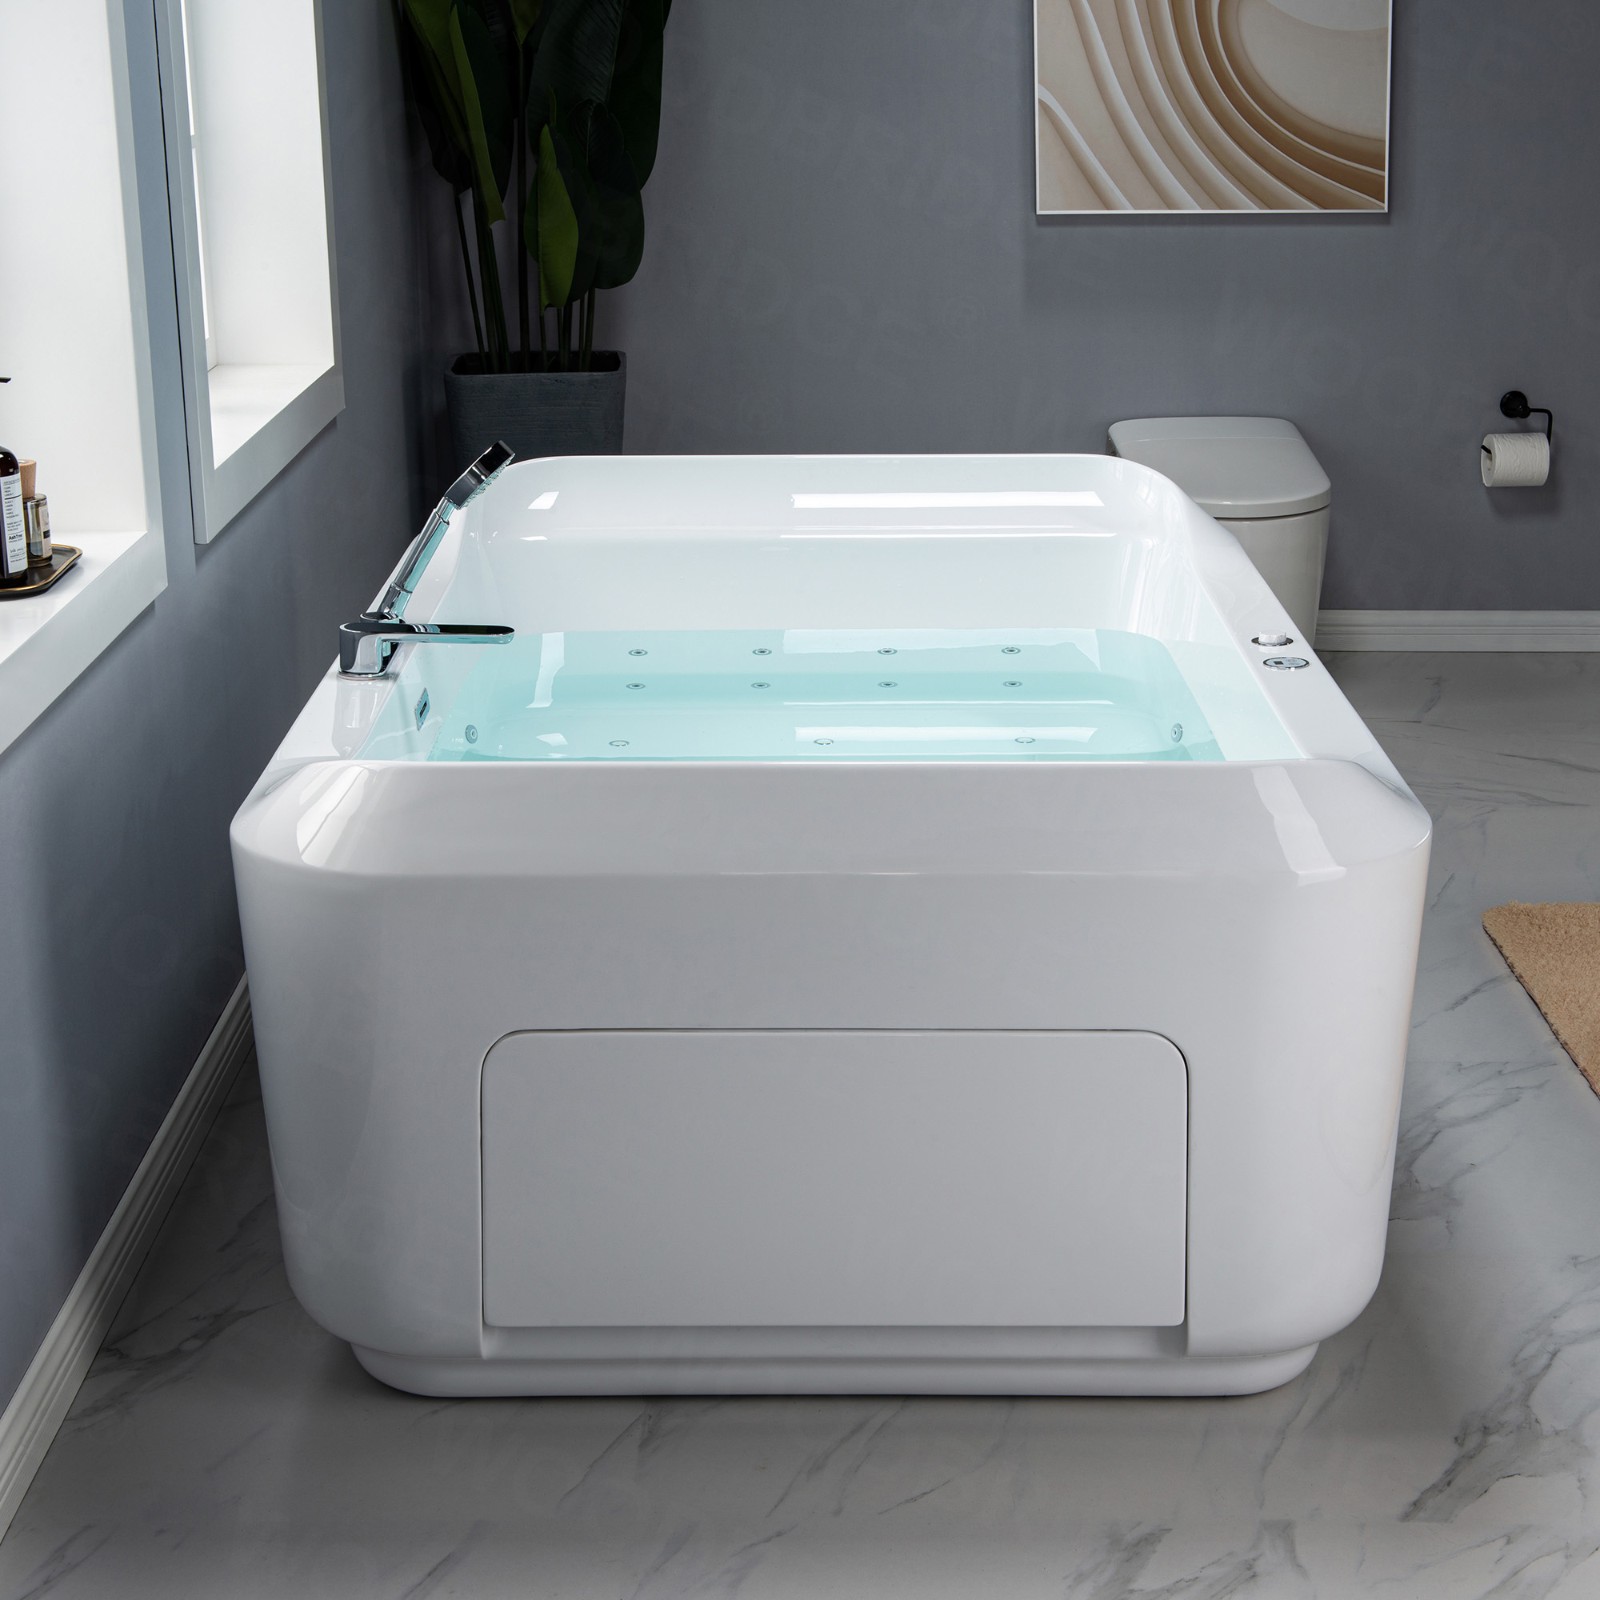  2 Person Freestanding Massage Hydrotherapy Bathtub Tub Hot Tub Spa, with Inline Heater. BTS-0091_9101